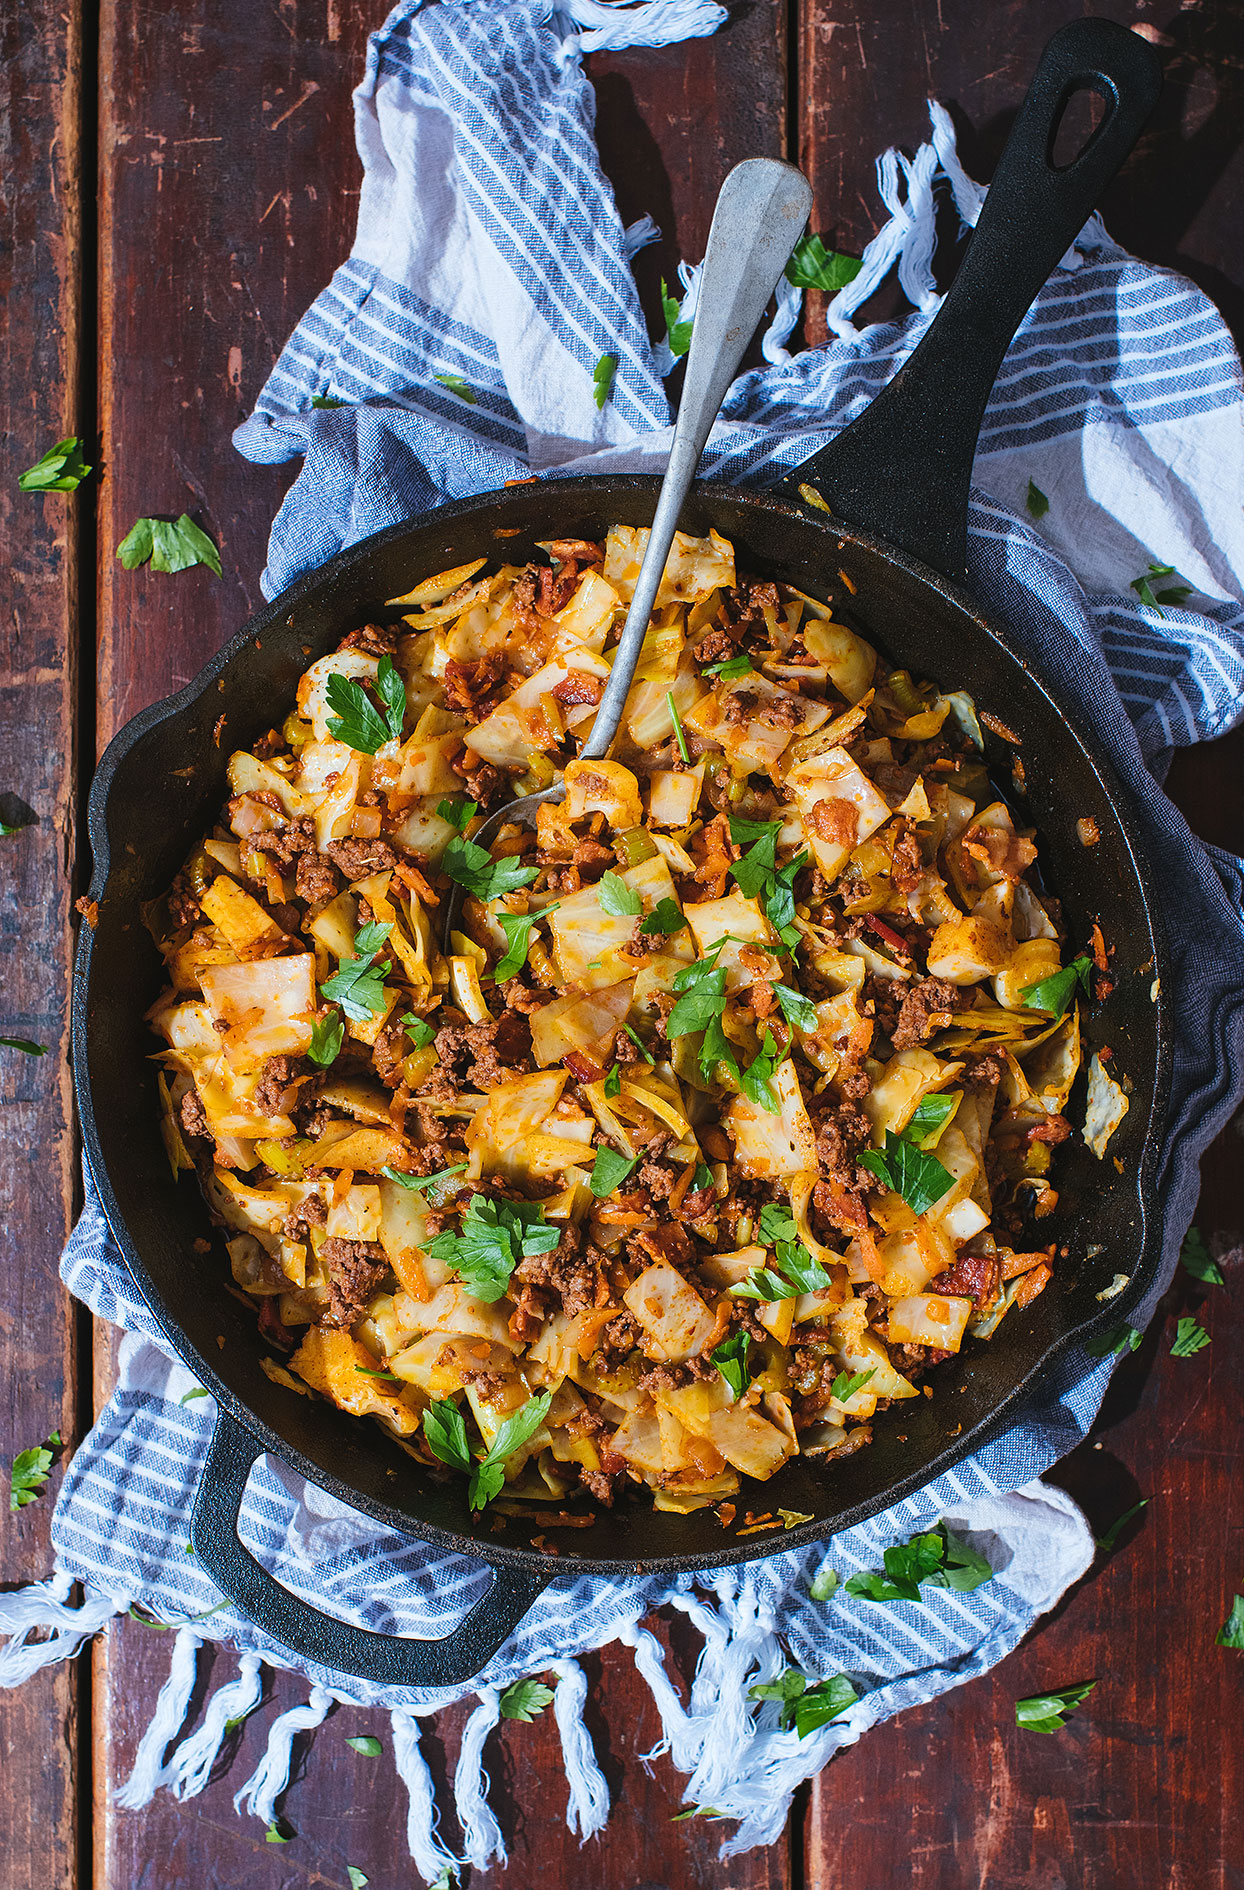 Cabbage and beef stir-fry